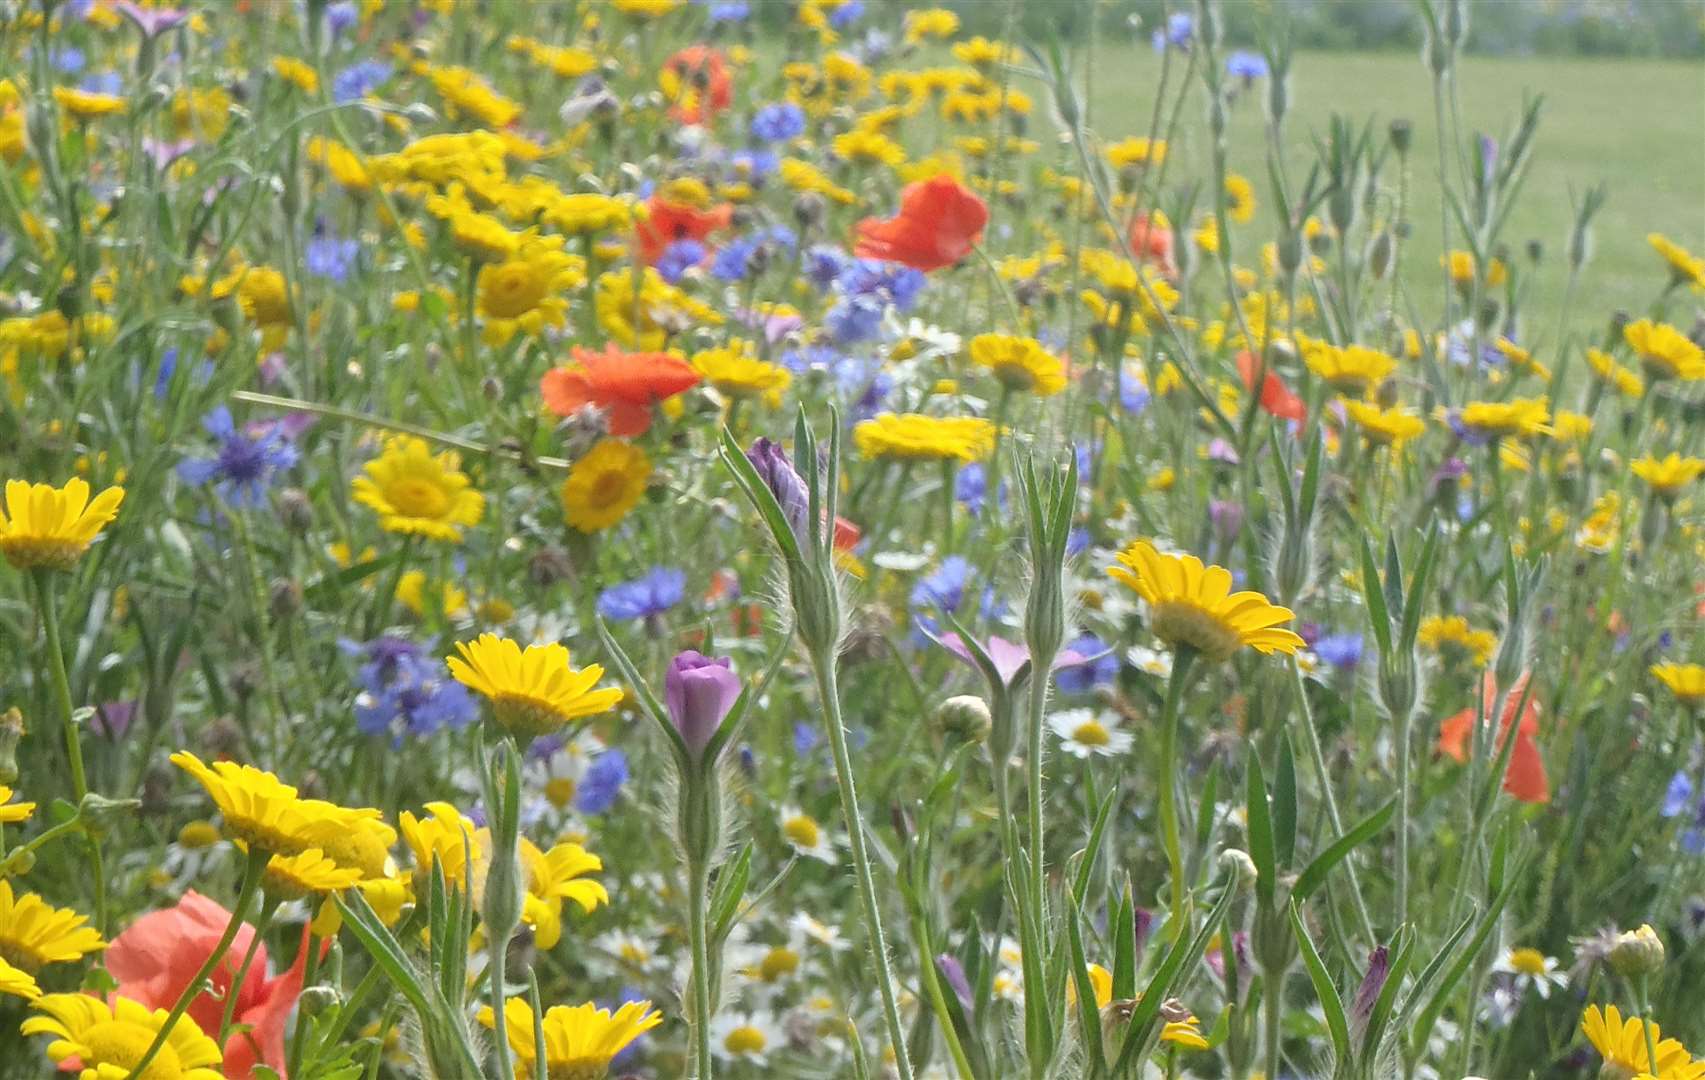 Last month's No Mow May encouraged people to leave lawns, verges and parkland alone to help encourage pollen and insects